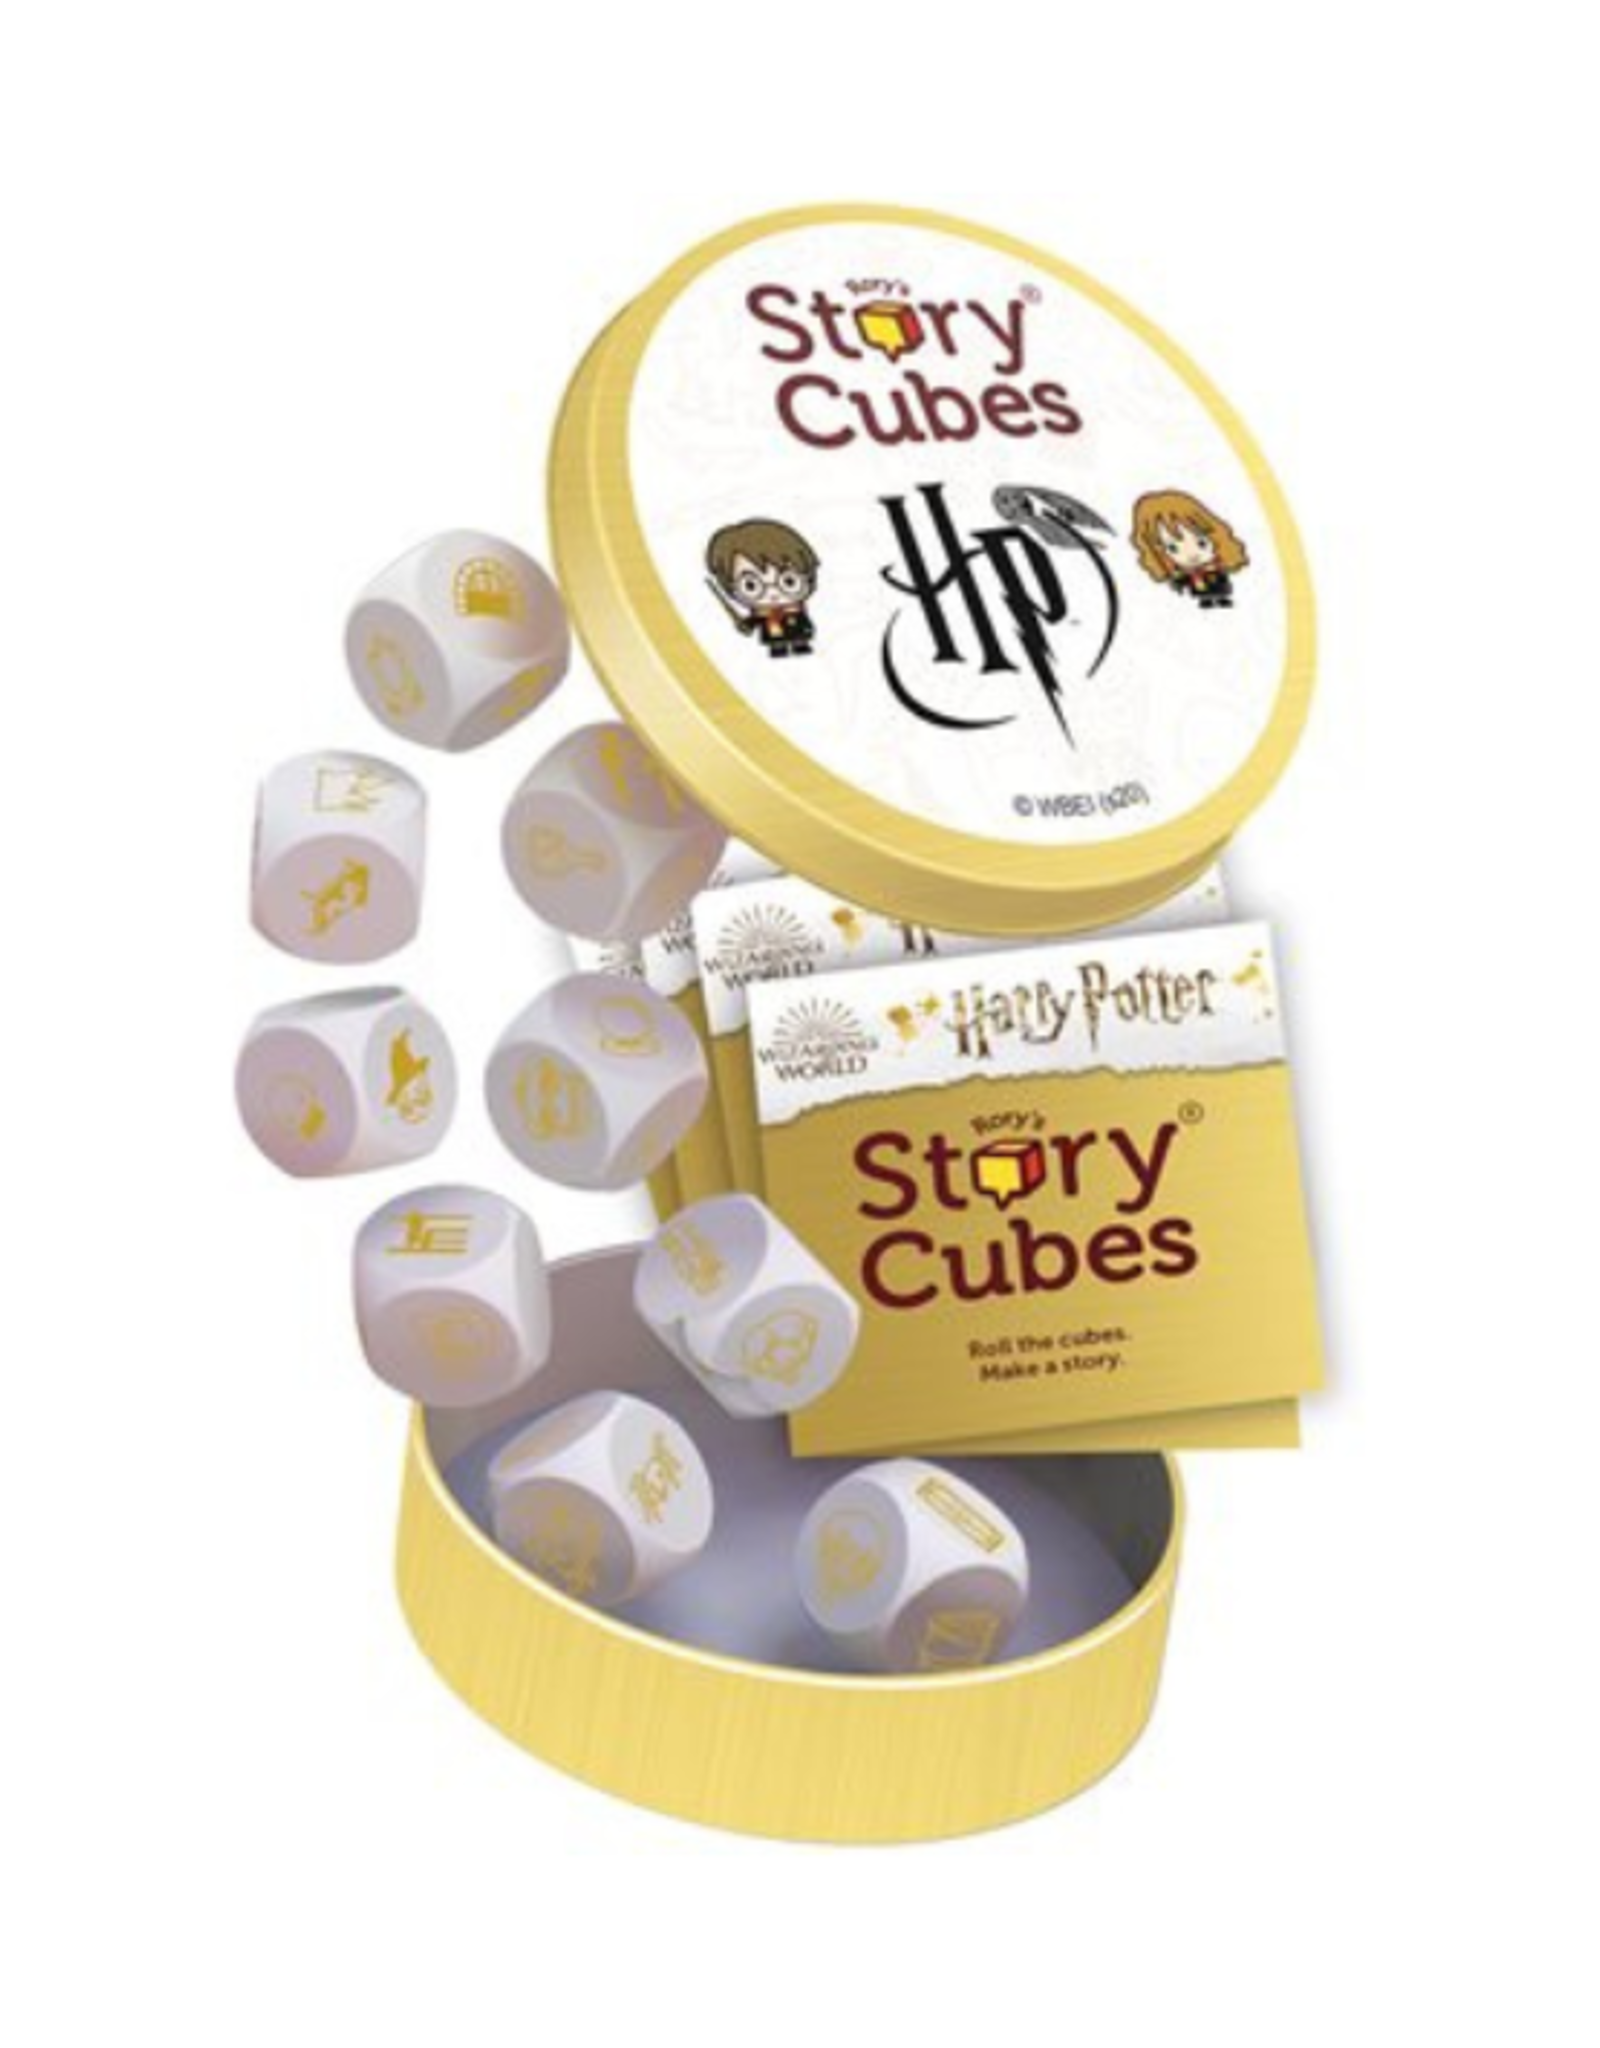 Zygo Matic Zygo Matic - Rory's Story Cubes Harry Potter